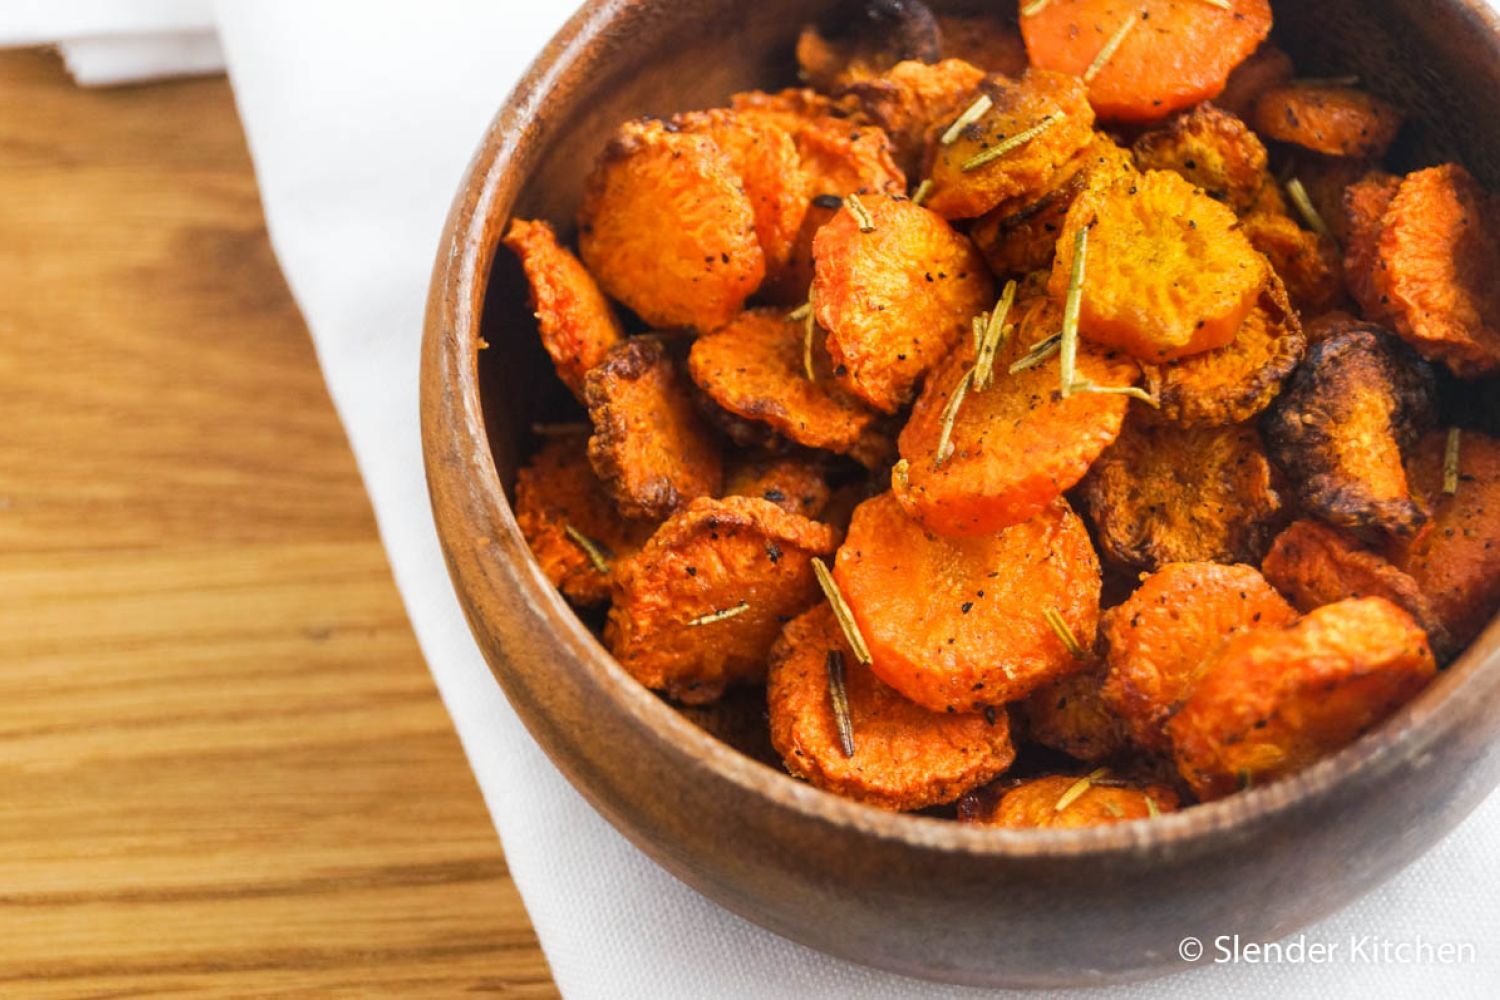 Baked carrot chips in a wooden bowl with rosemary, salt, and pepper.